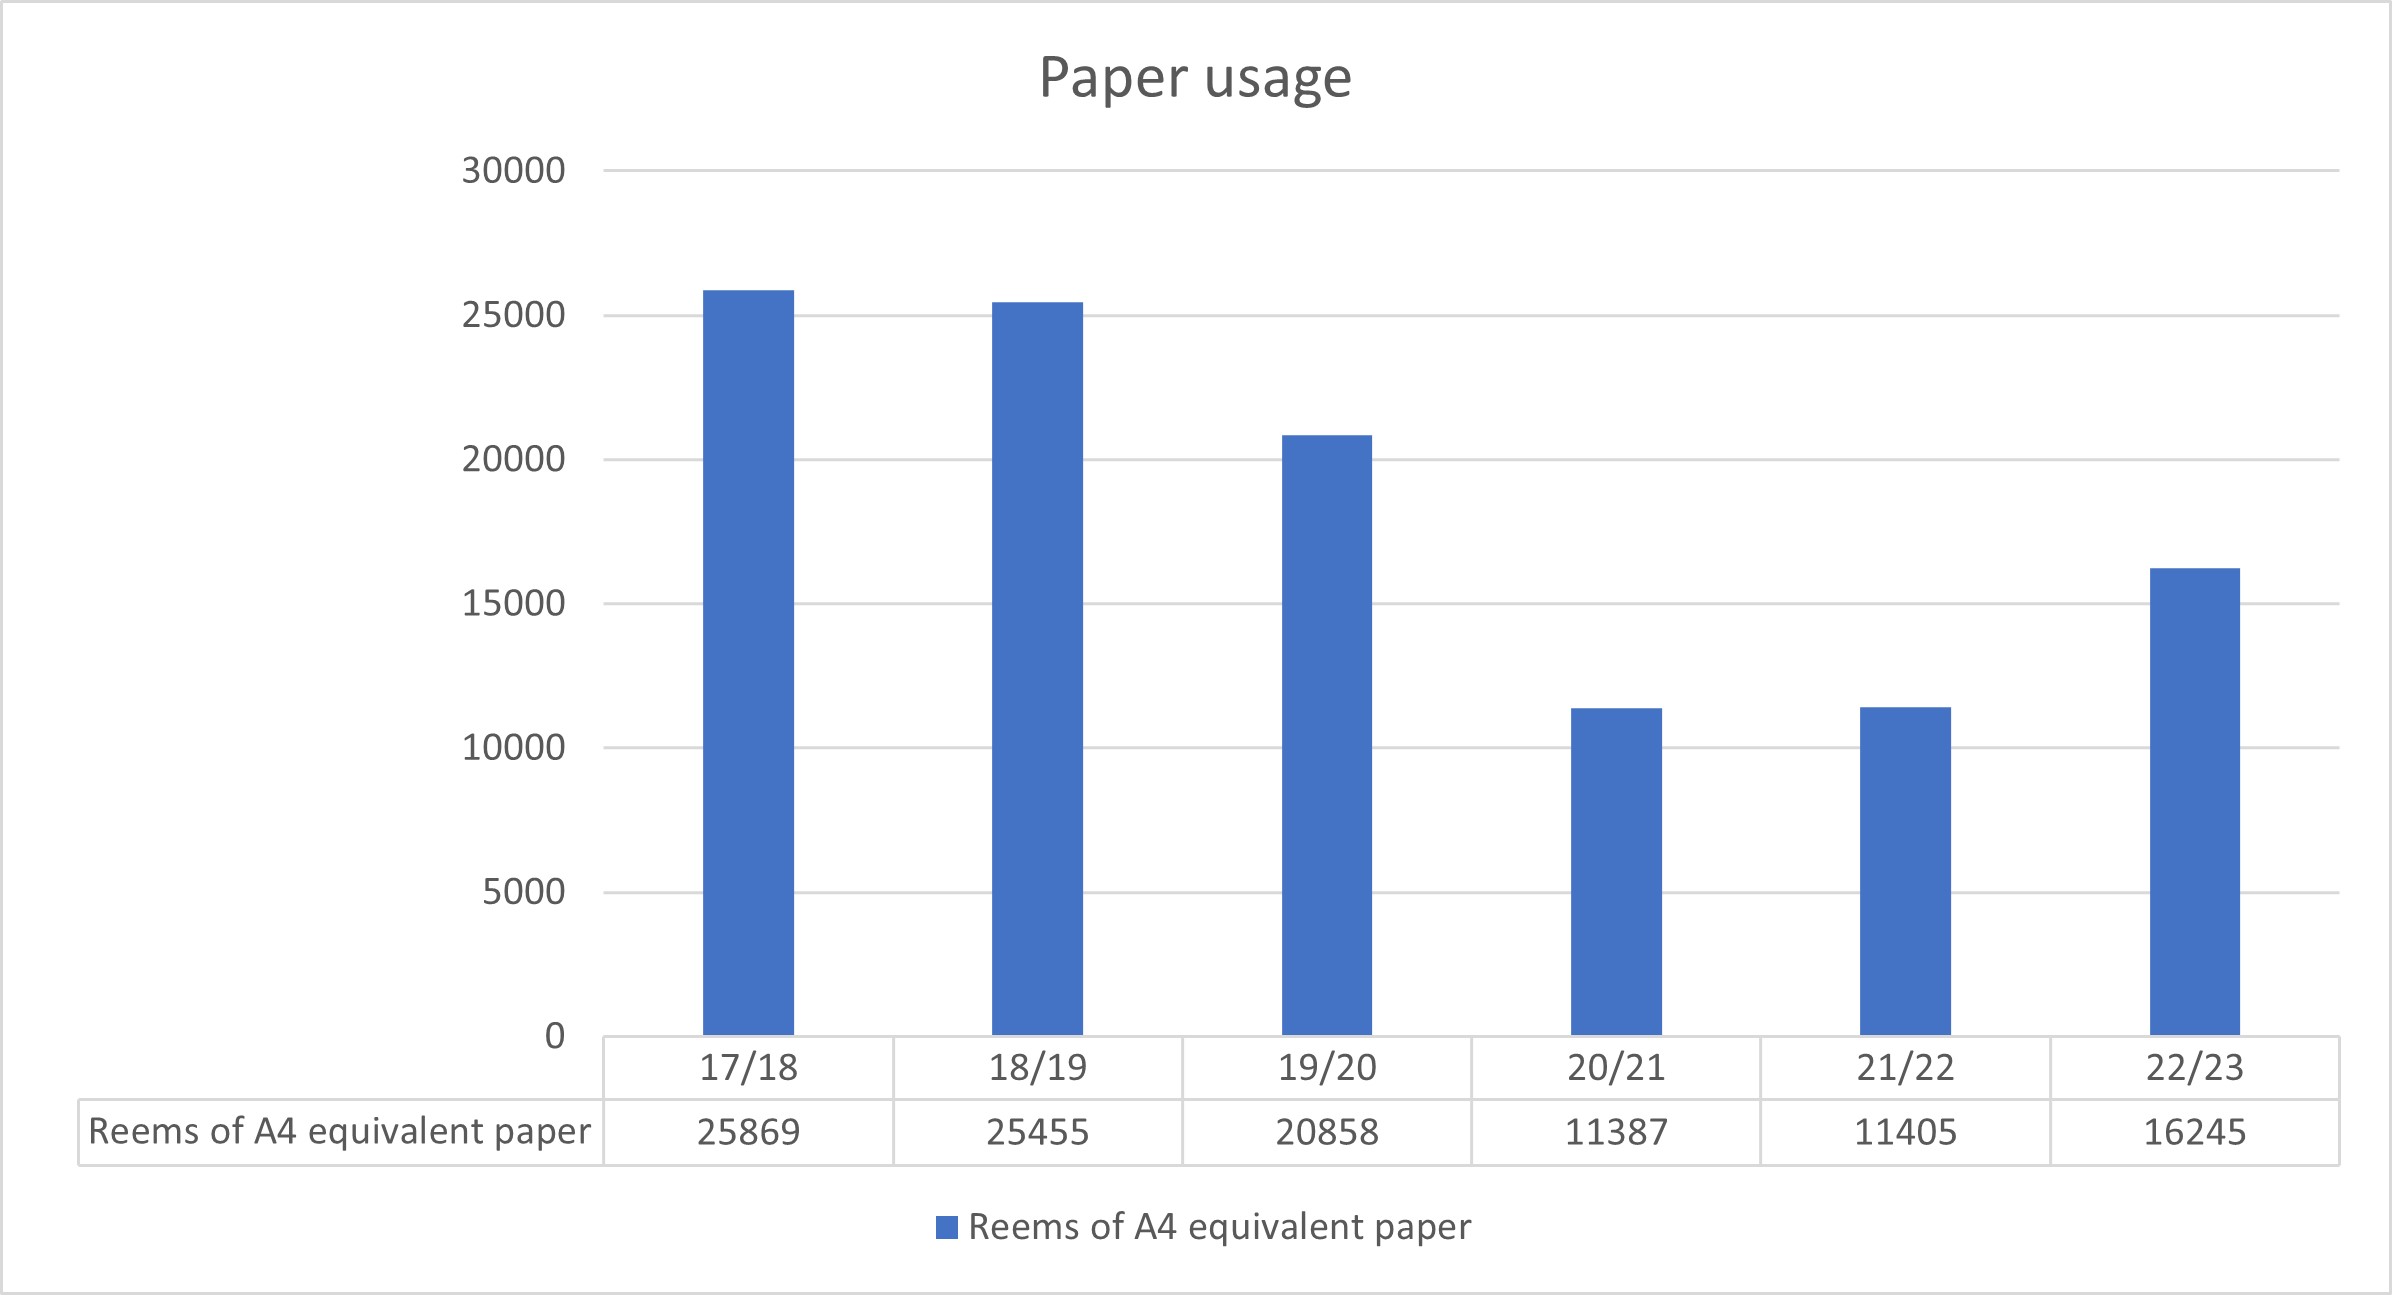 Bar chart showing NHSBSA paper usage in reams of A4 equivalent paper, by year